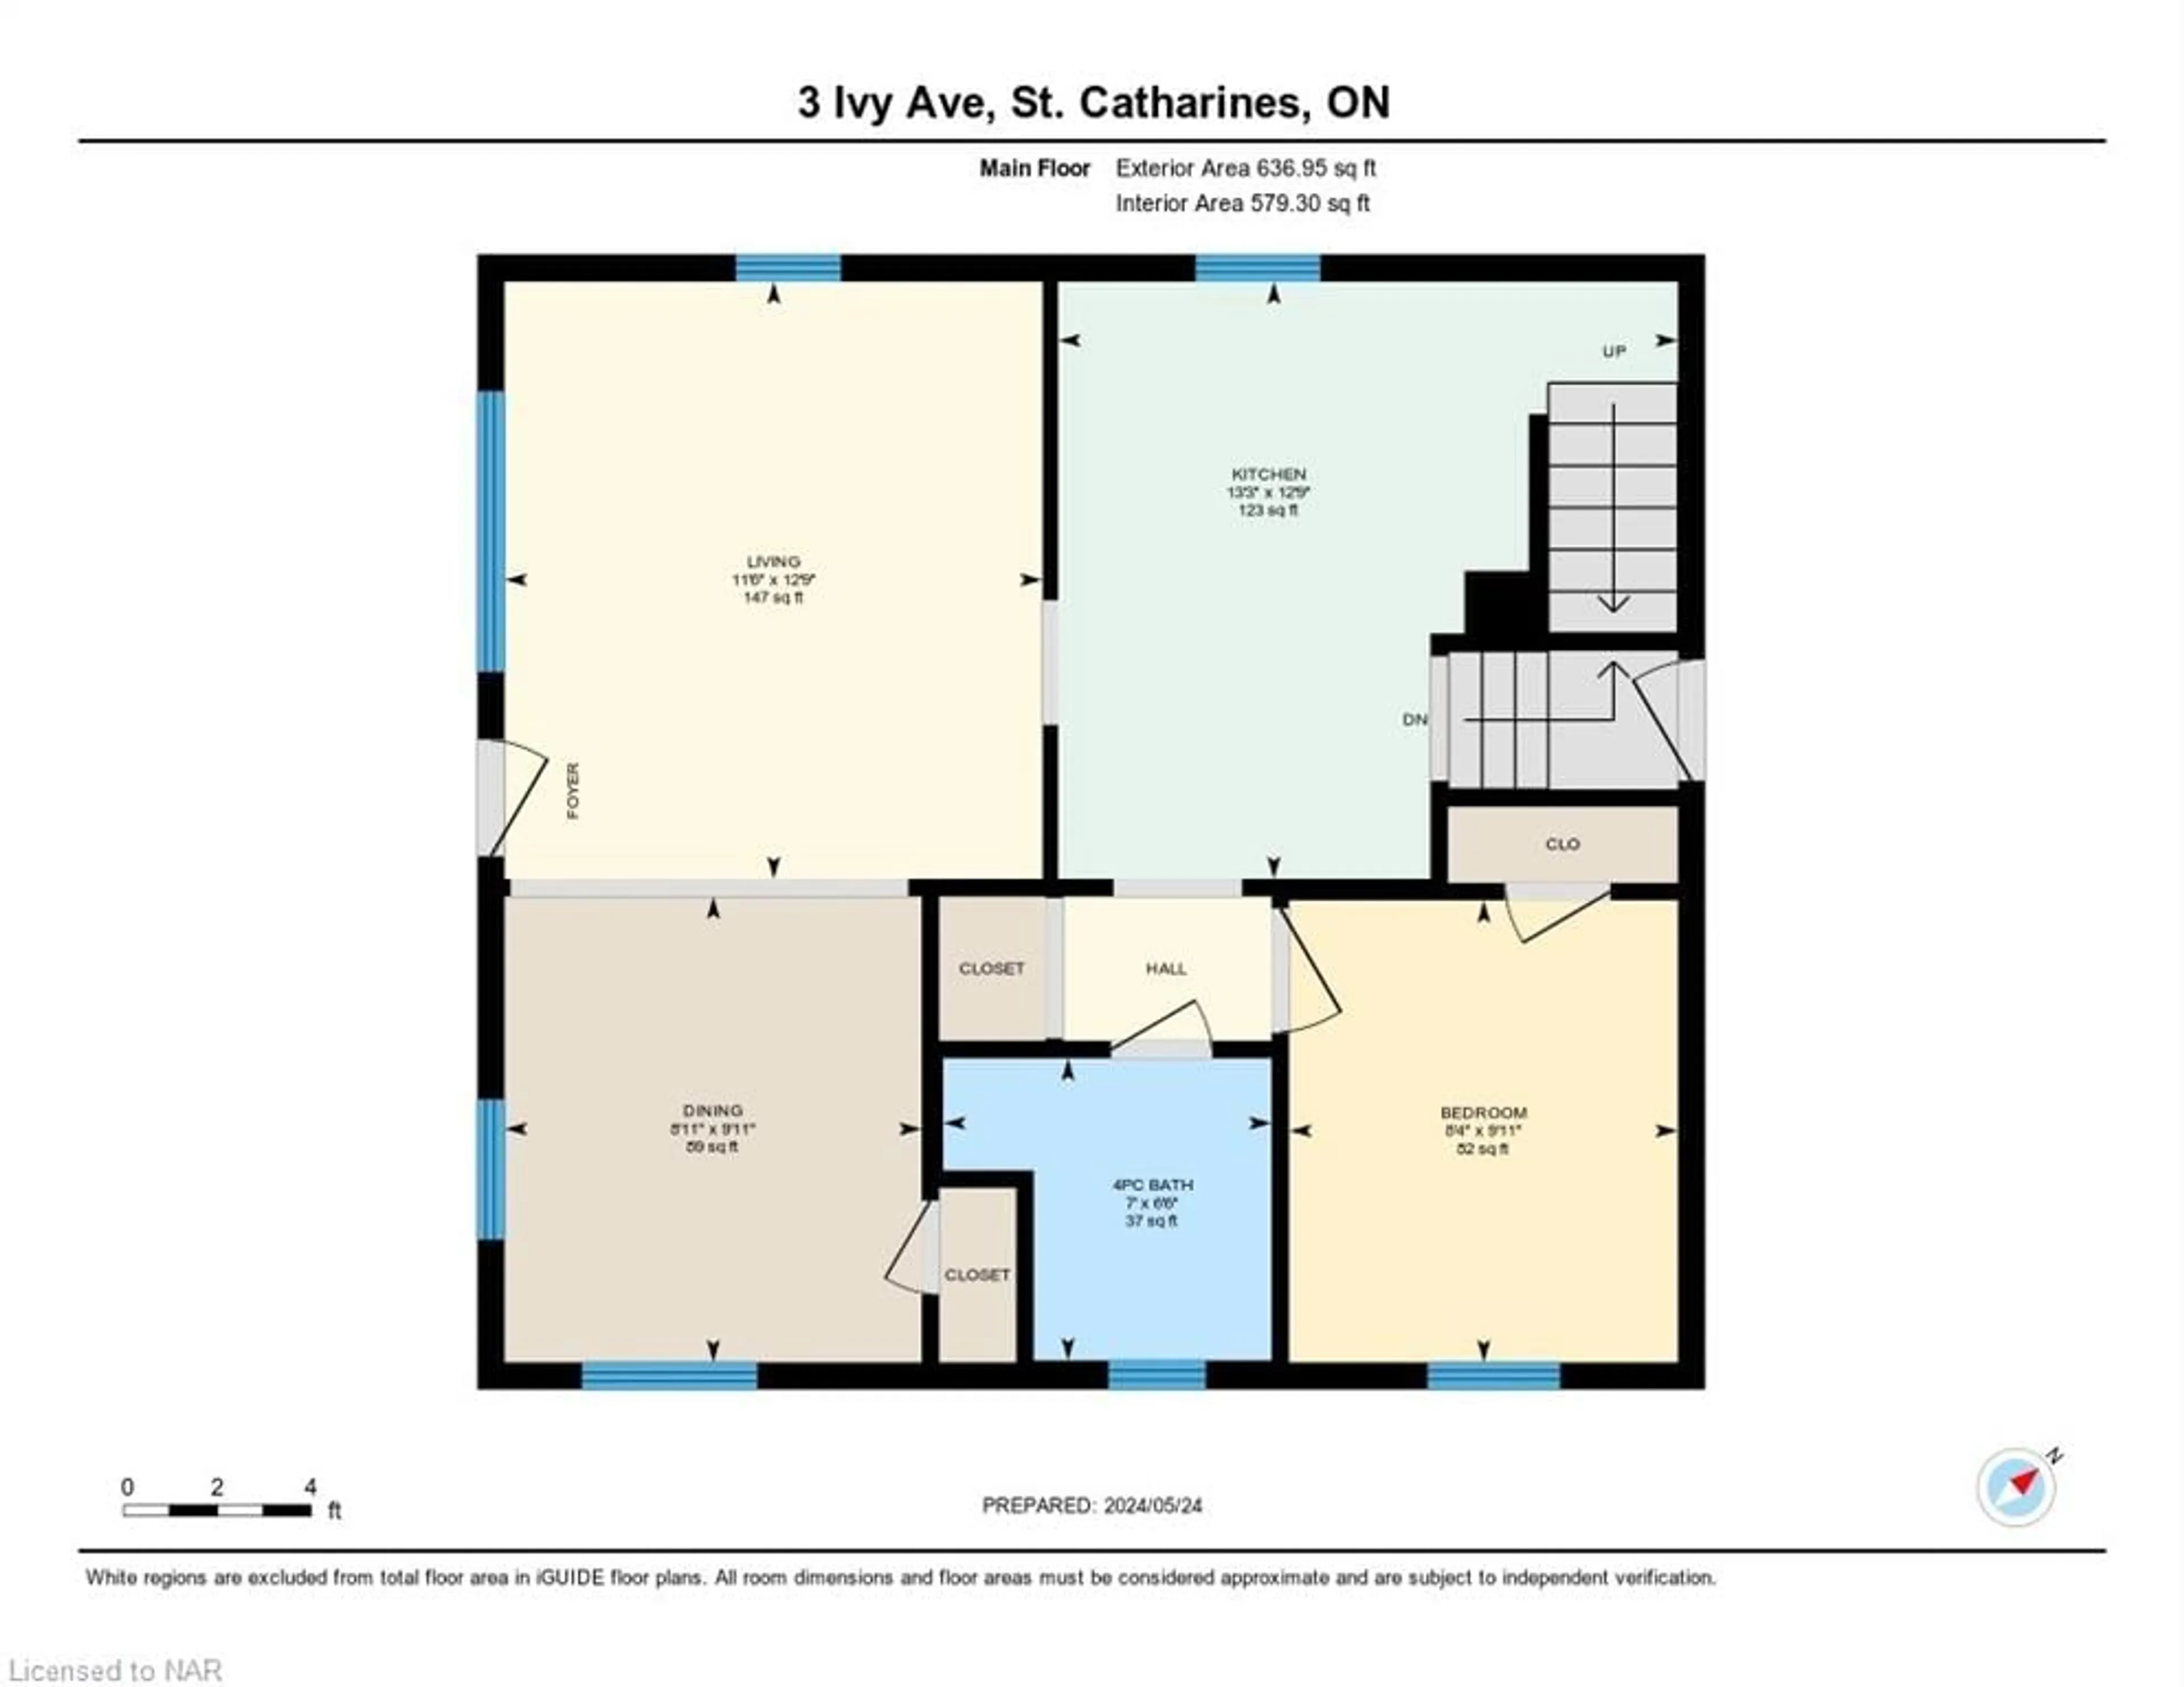 Floor plan for 3 Ivy Ave, St. Catharines Ontario L2P 1Y1